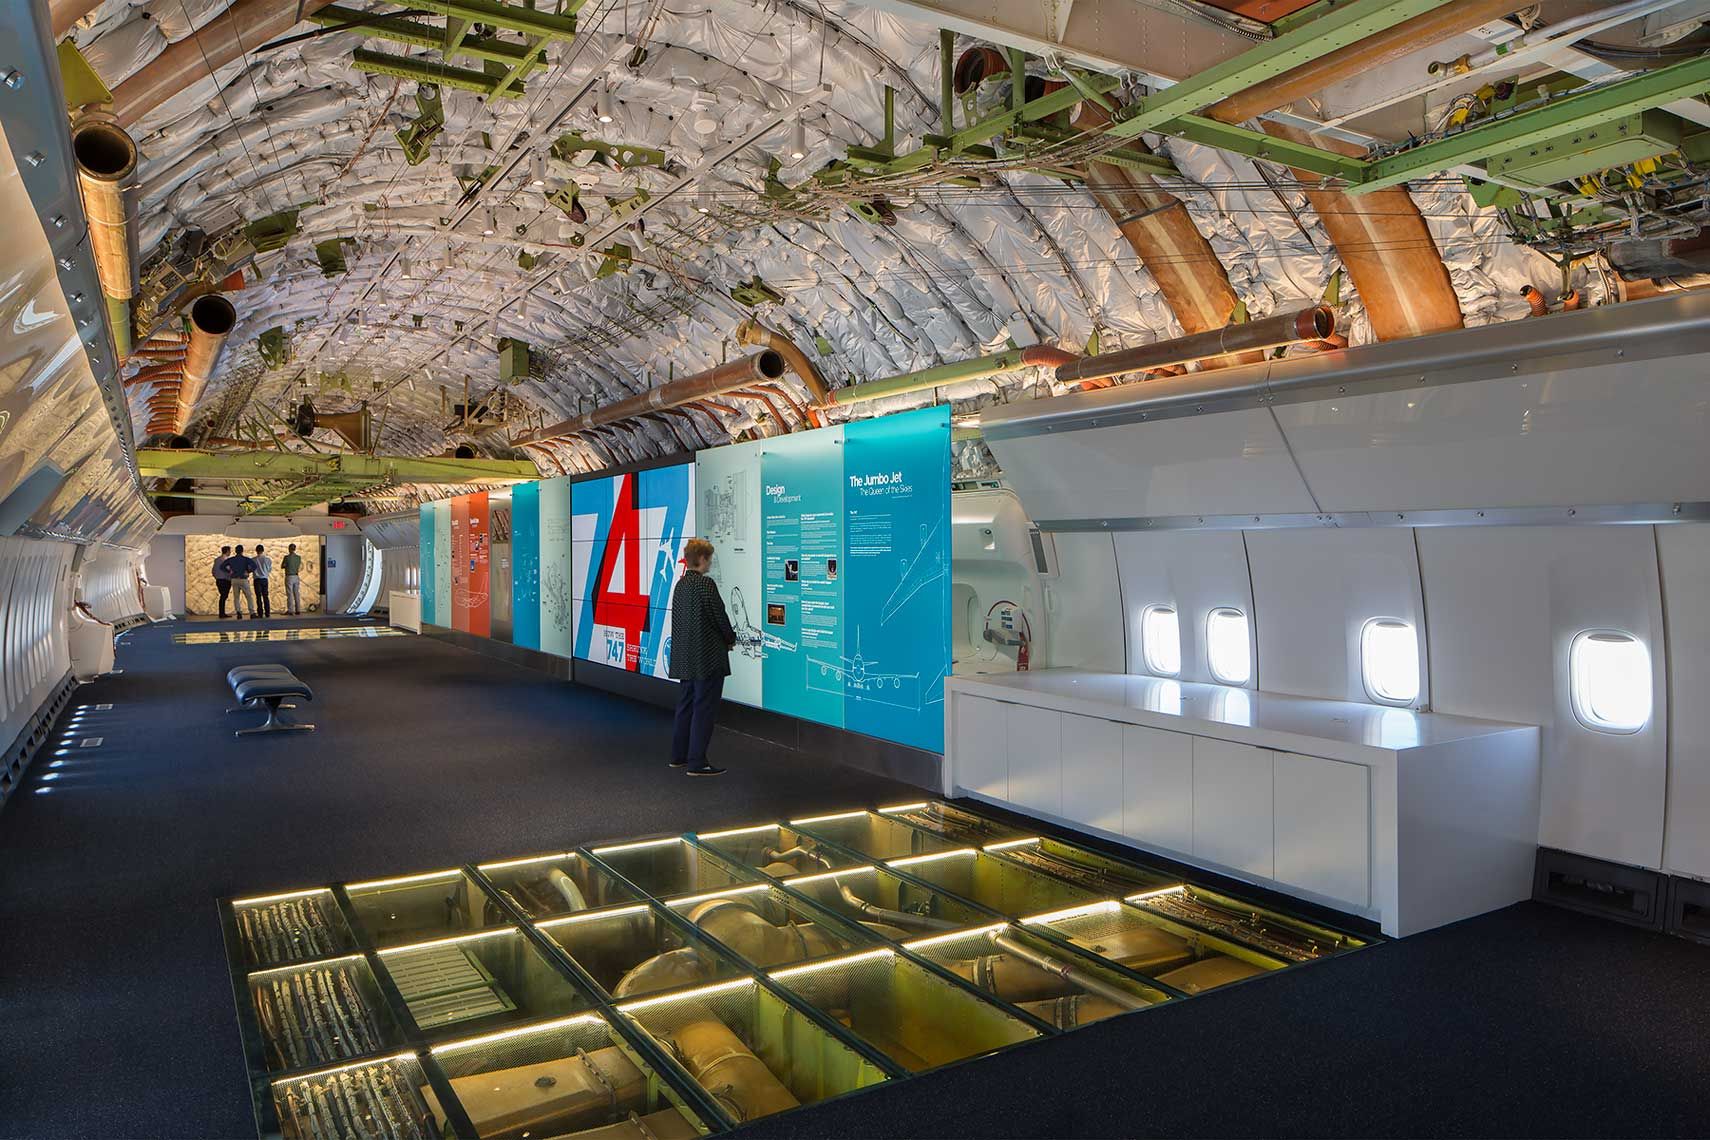 Interior view of the interactive exhibits inside a 747 airplane at the Delta Flight Museum